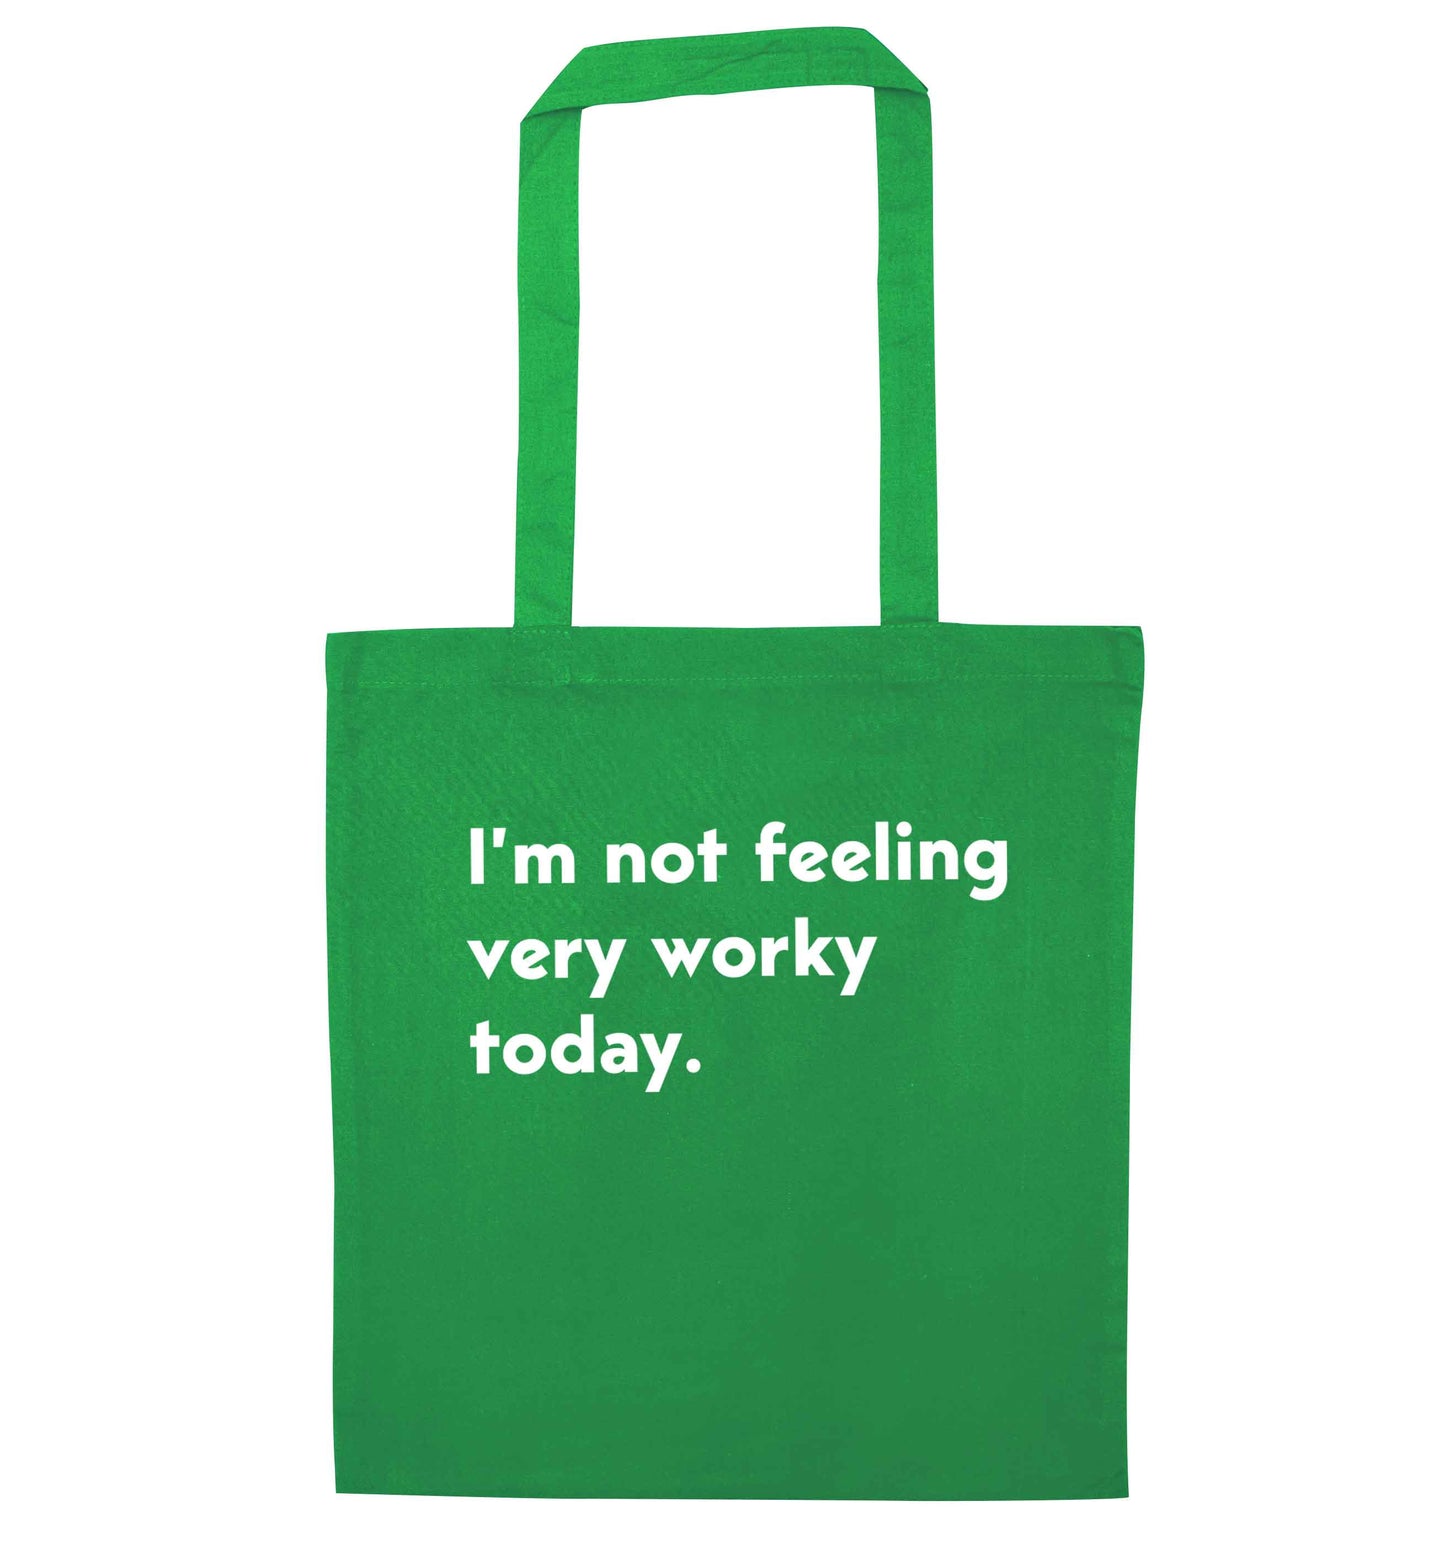 I'm not feeling very worky today green tote bag